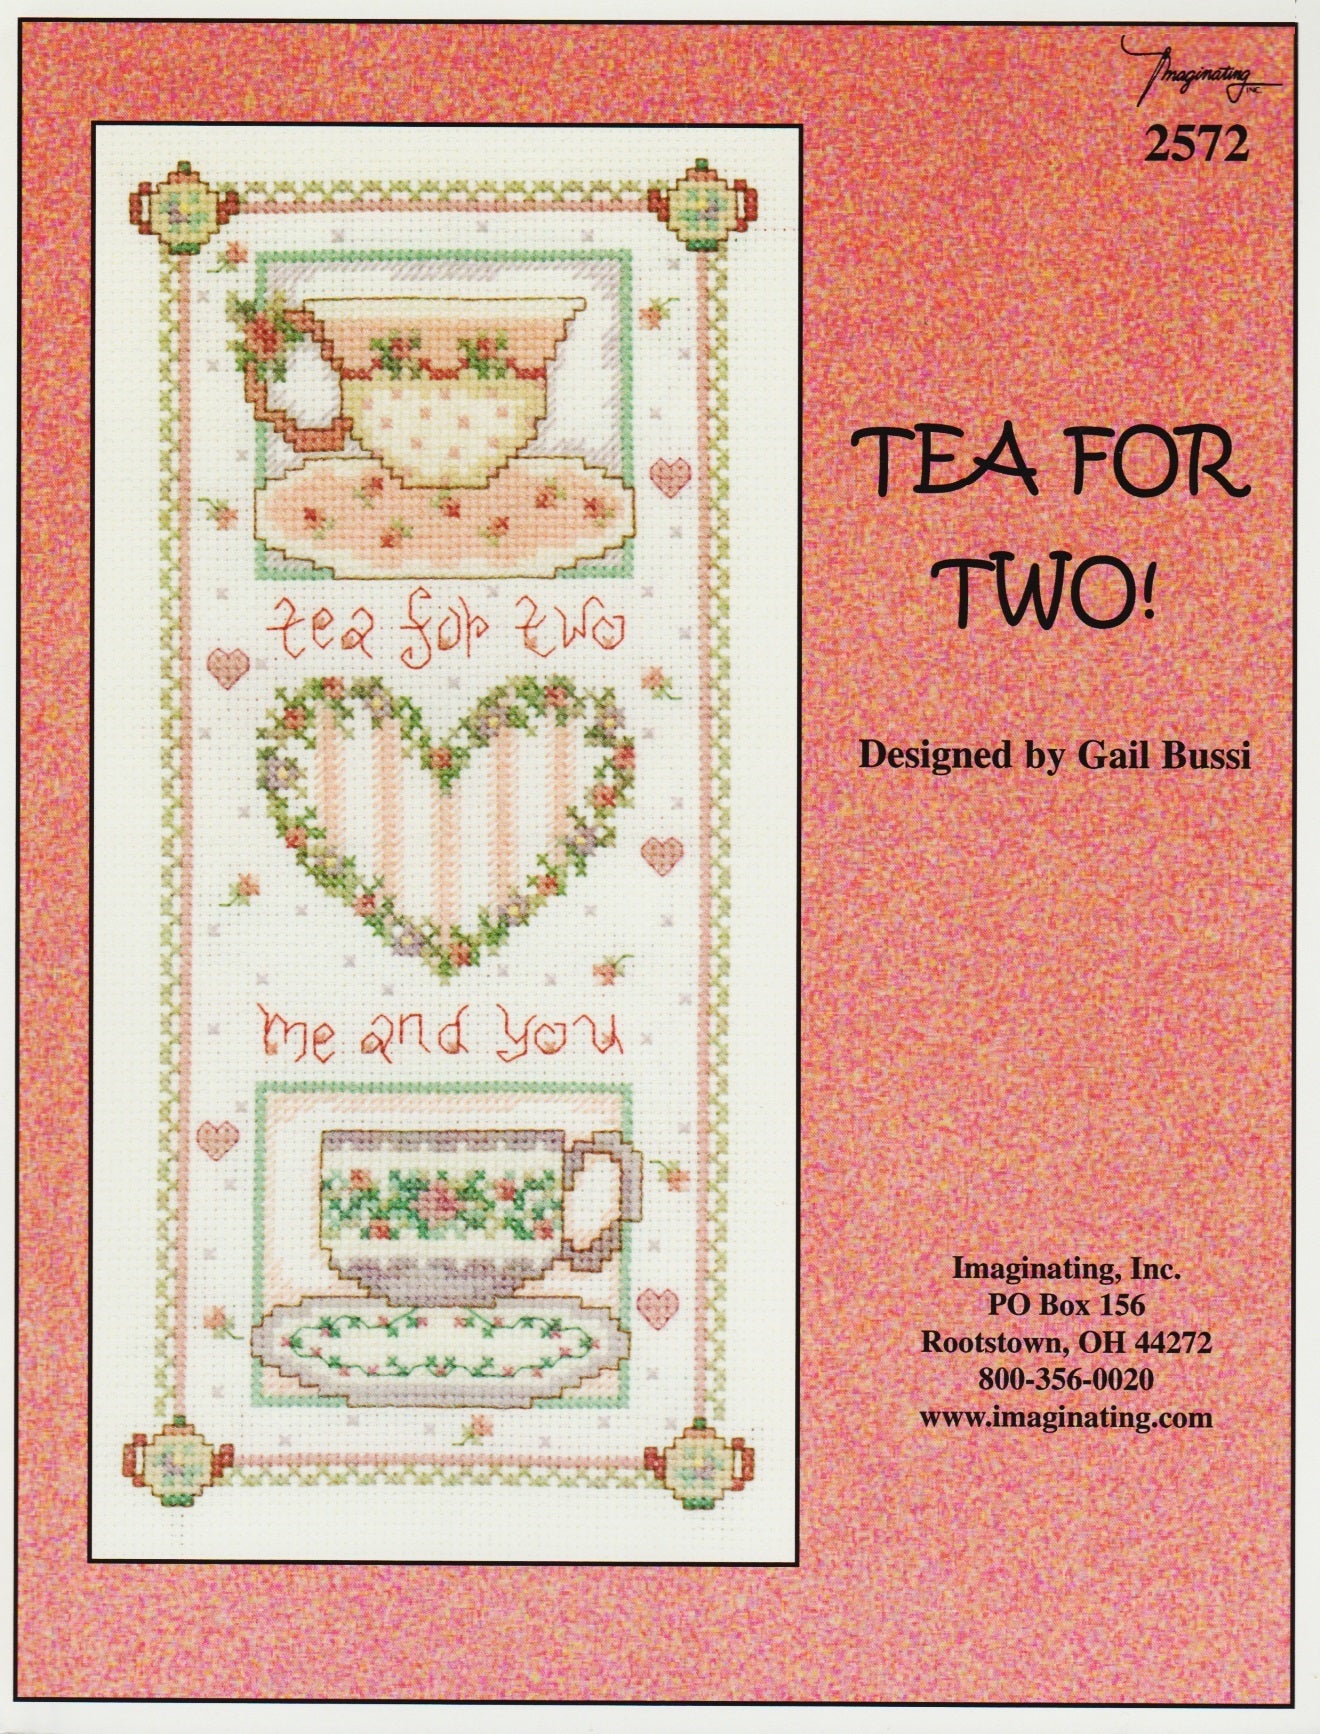 Imaginating Tea For Two! 2572 cross stitch pattern